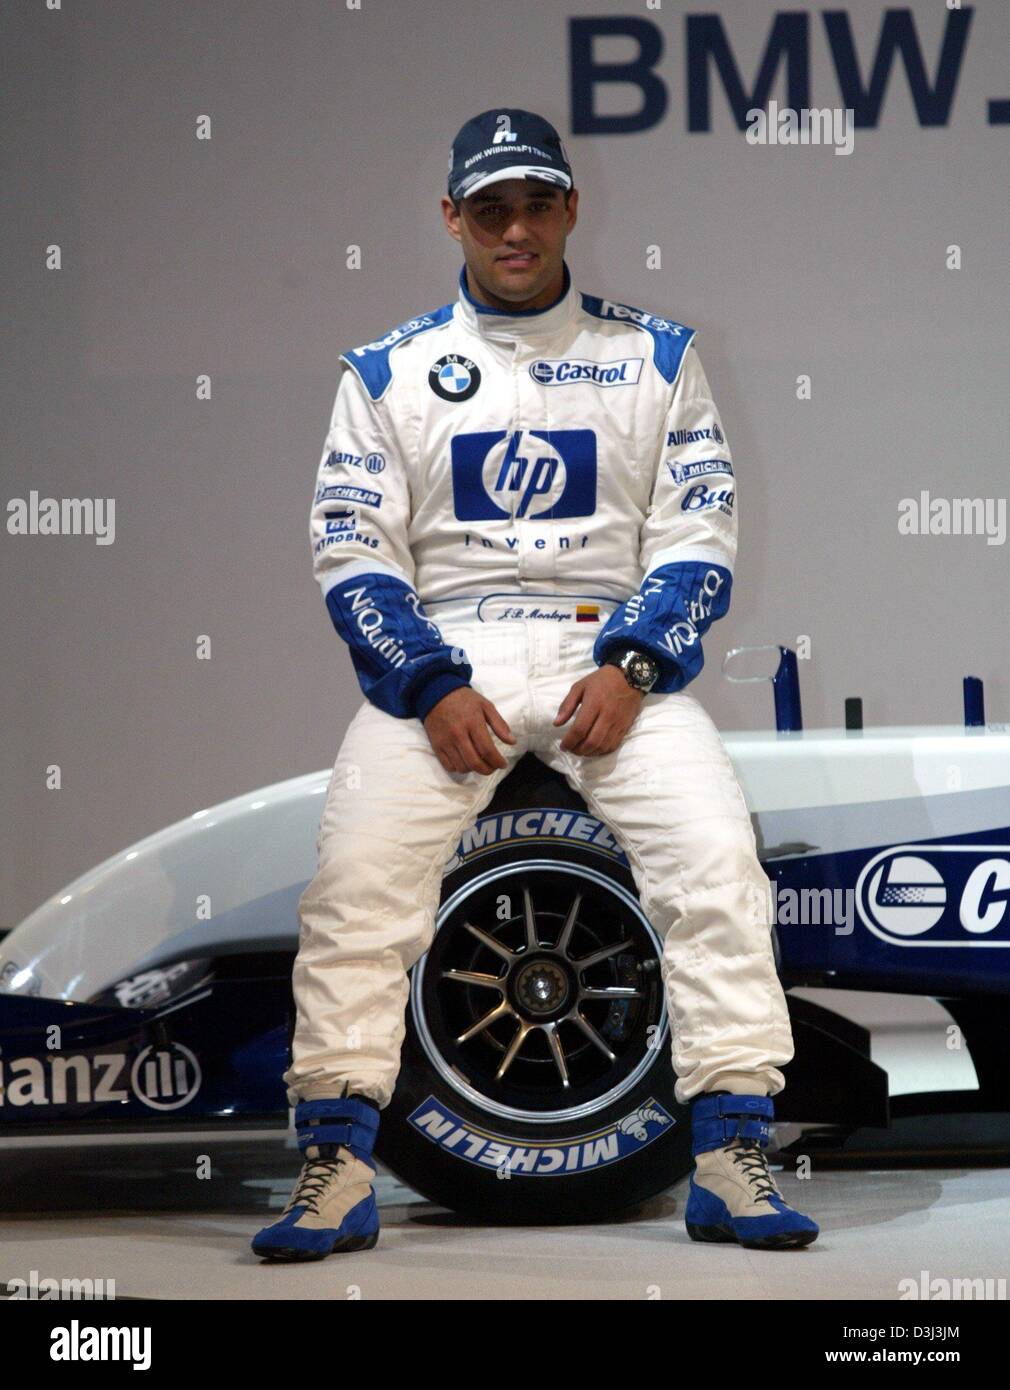 (dpa) - Colombian formula one pilot Juan Pablo Montoya sits on the new BMW-Williams FW26 racing car for the upcoming season during its presentation in Valencia, Spain, 5 January 2004. The car has a new aerodynamic concept and a new motor. The FW26 will be intensively tested in Jerez, Spain, as of 7 January 2004. Stock Photo